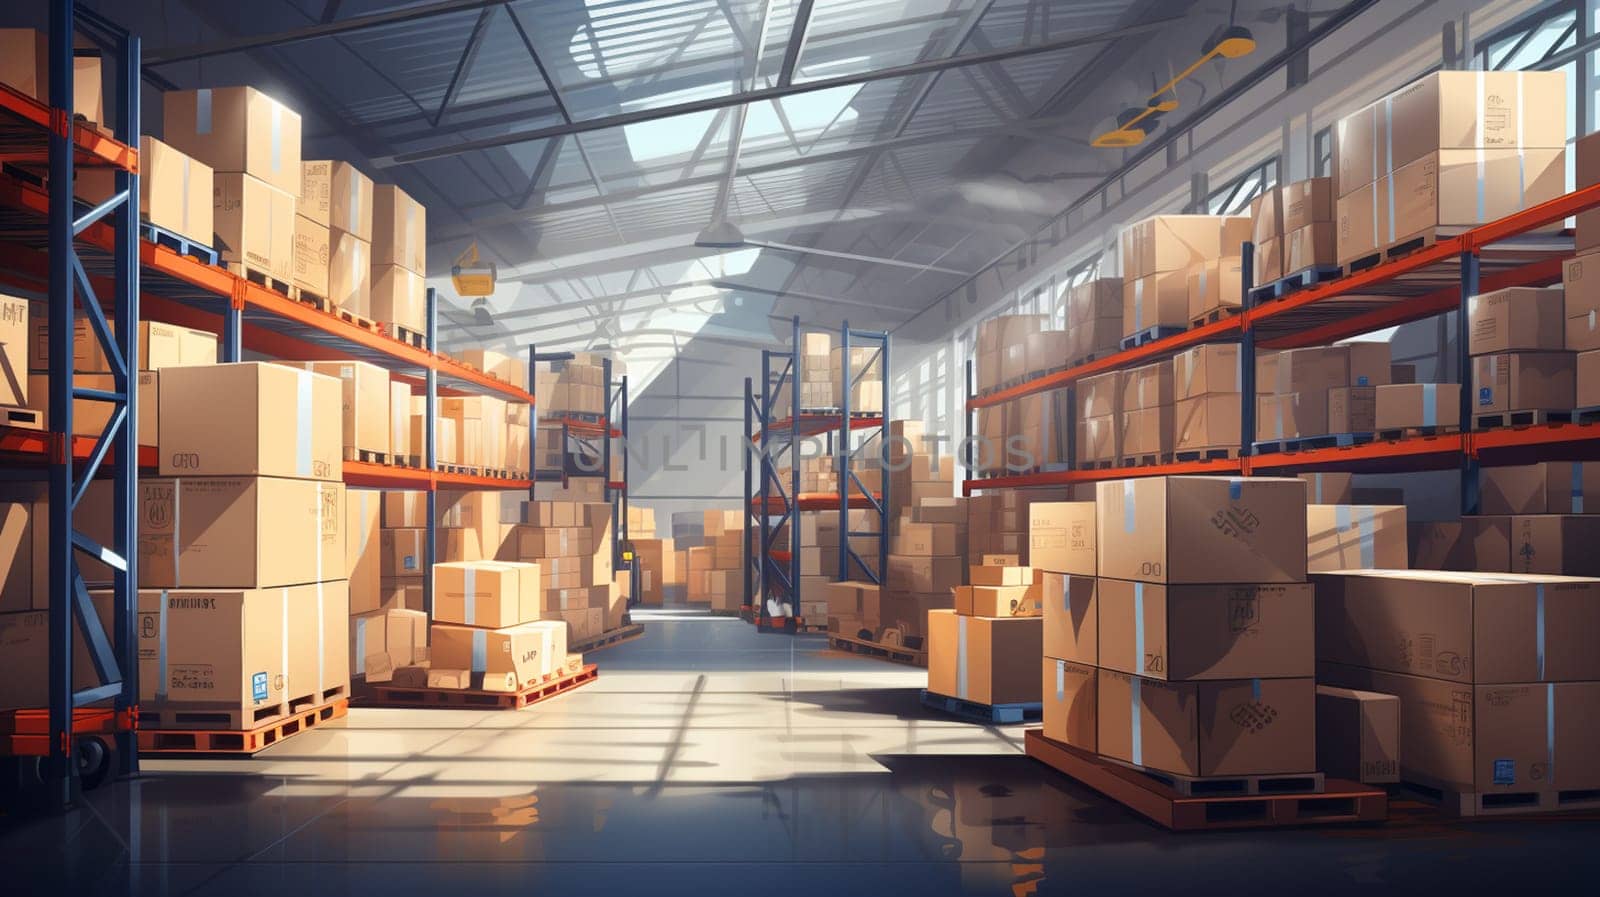 Between the Shelves of a Warehouse with Sun Shining Through the Window 3D Rendering by Andelov13